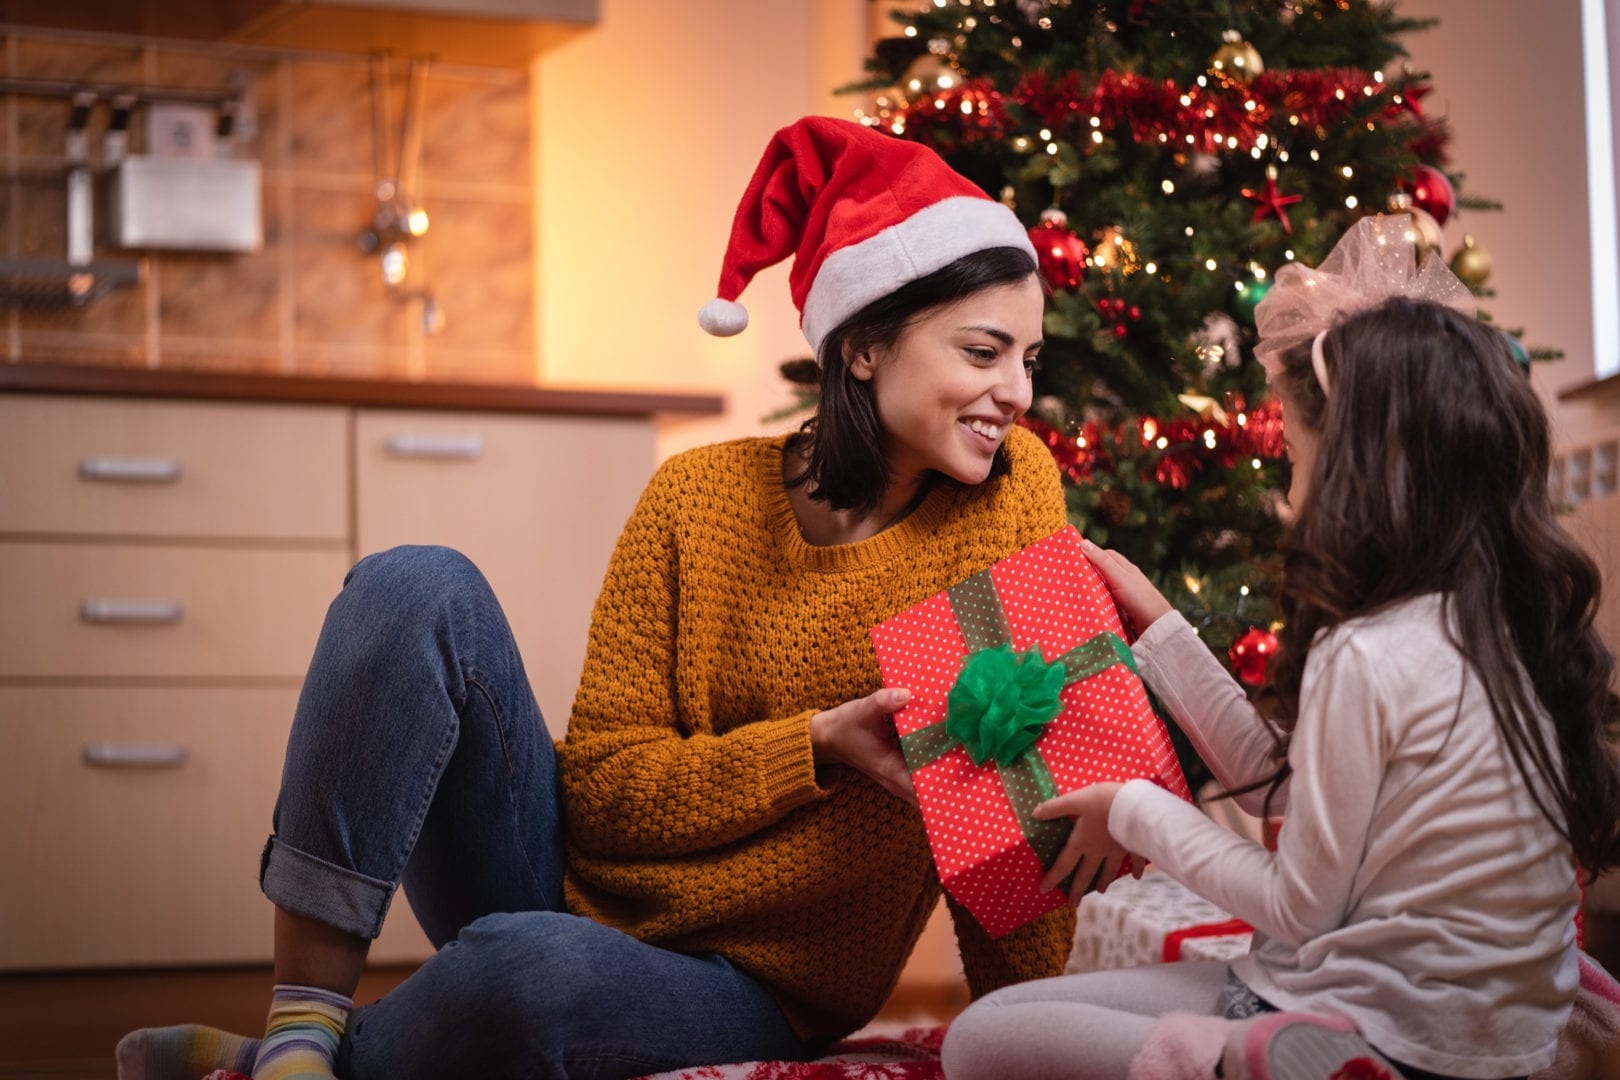 How nannies can handle the holidays when their employers have different beliefs